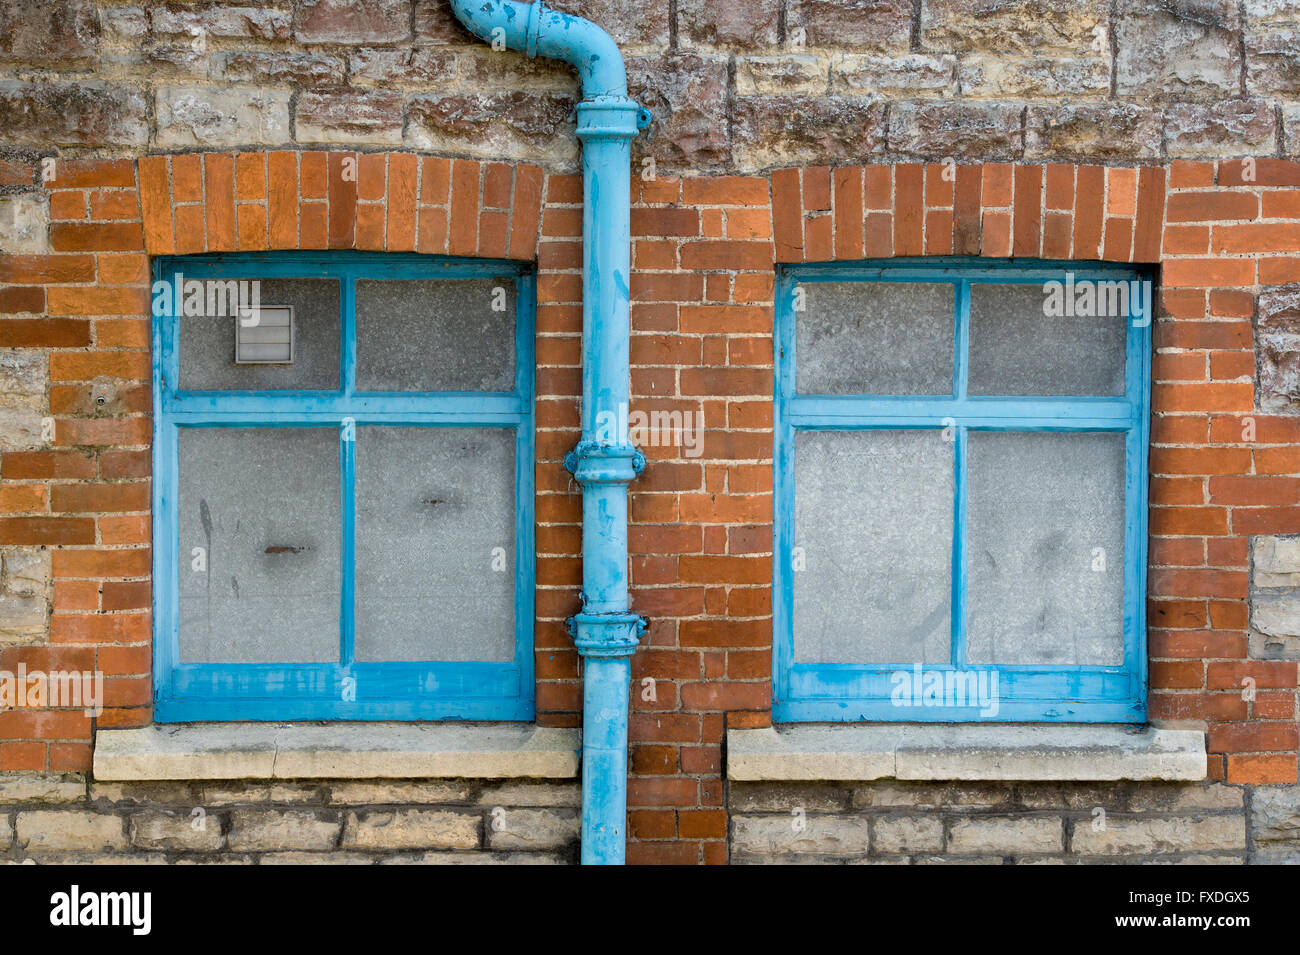 Stone and brick house wall with blue windows and drainpipe abstract. Glastonbury, Somerset, England Stock Photo